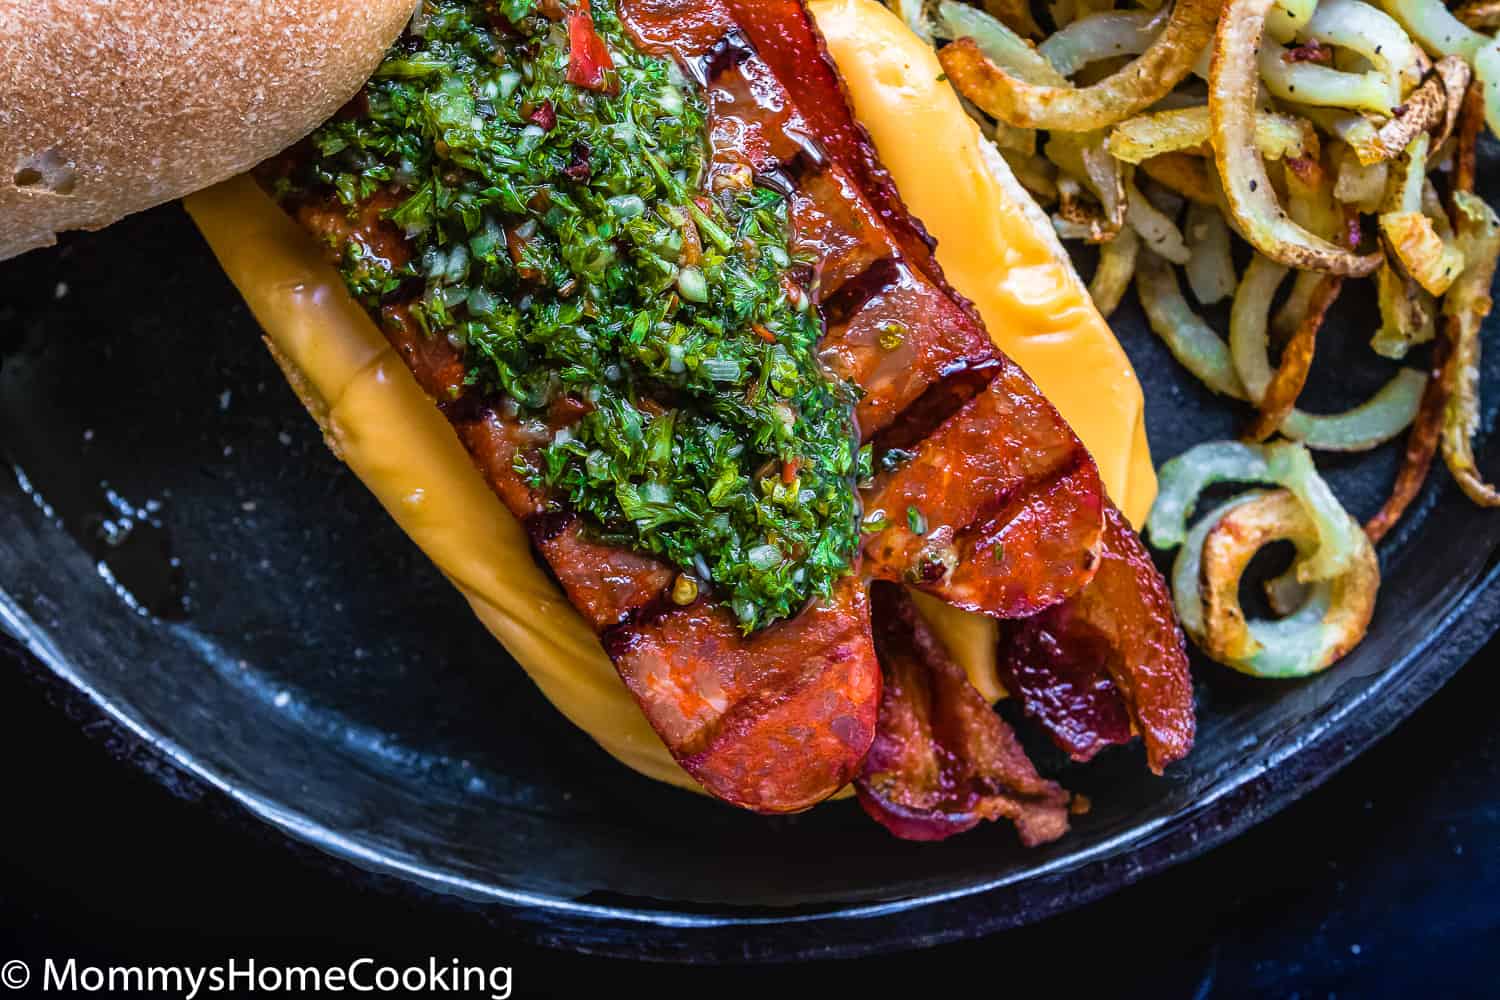 A hot dog with chimichurri sauce.